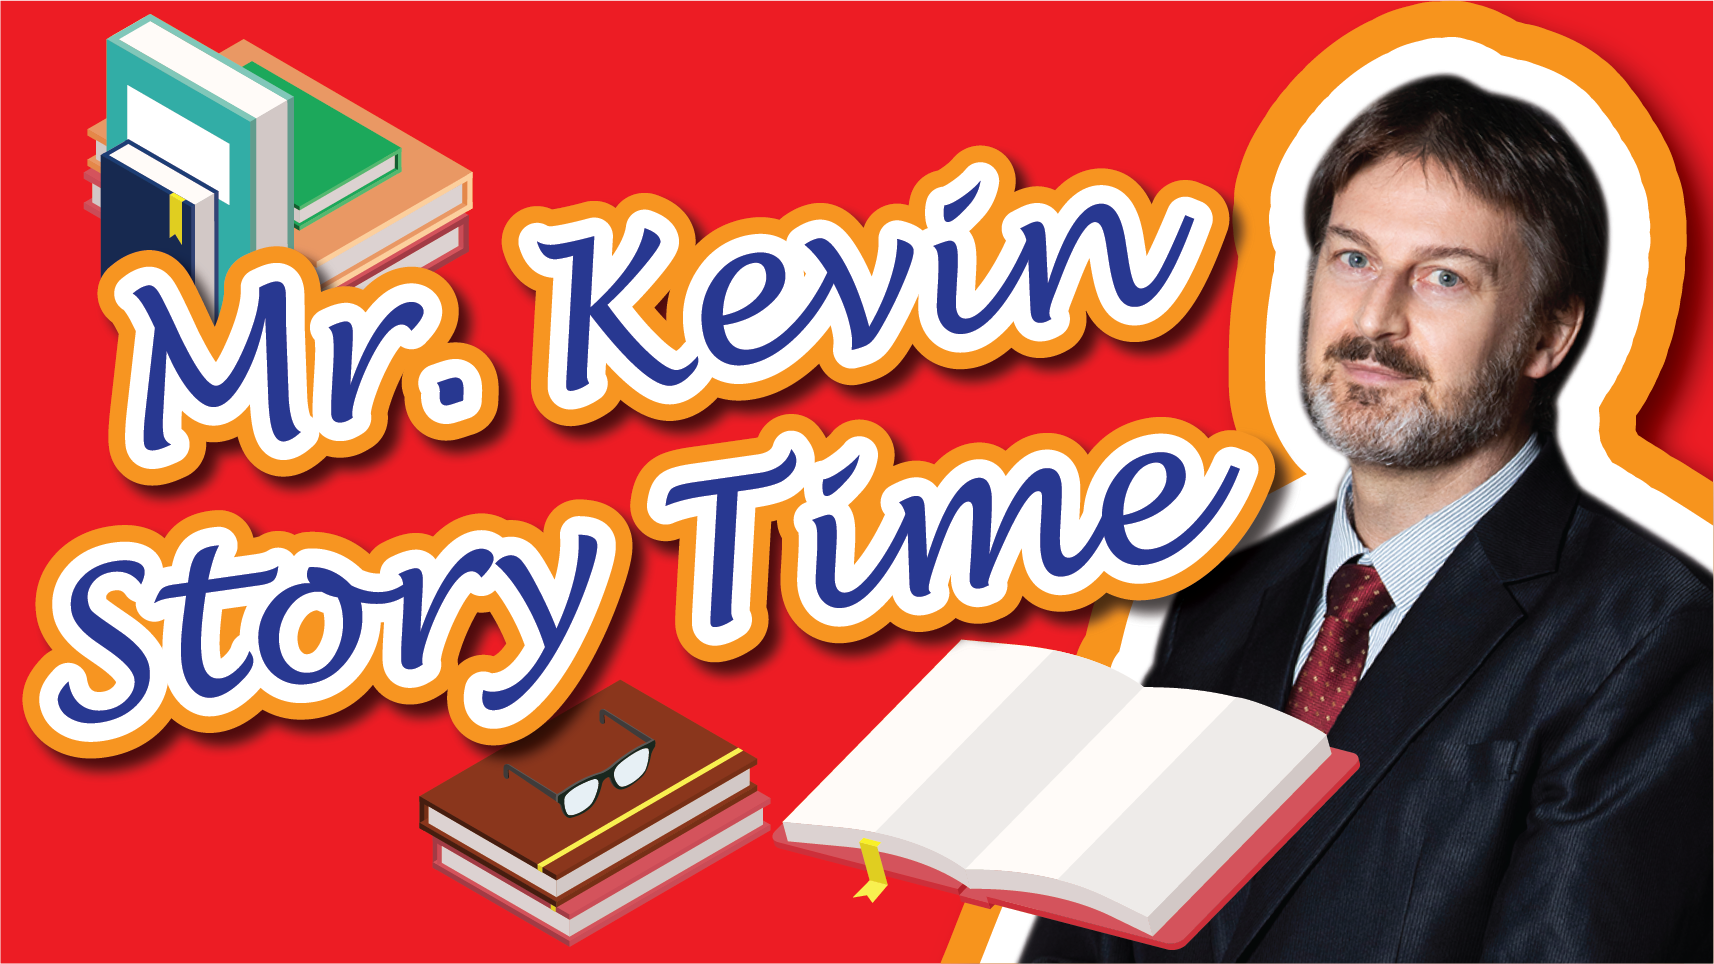 Mr. Kevin Story Time